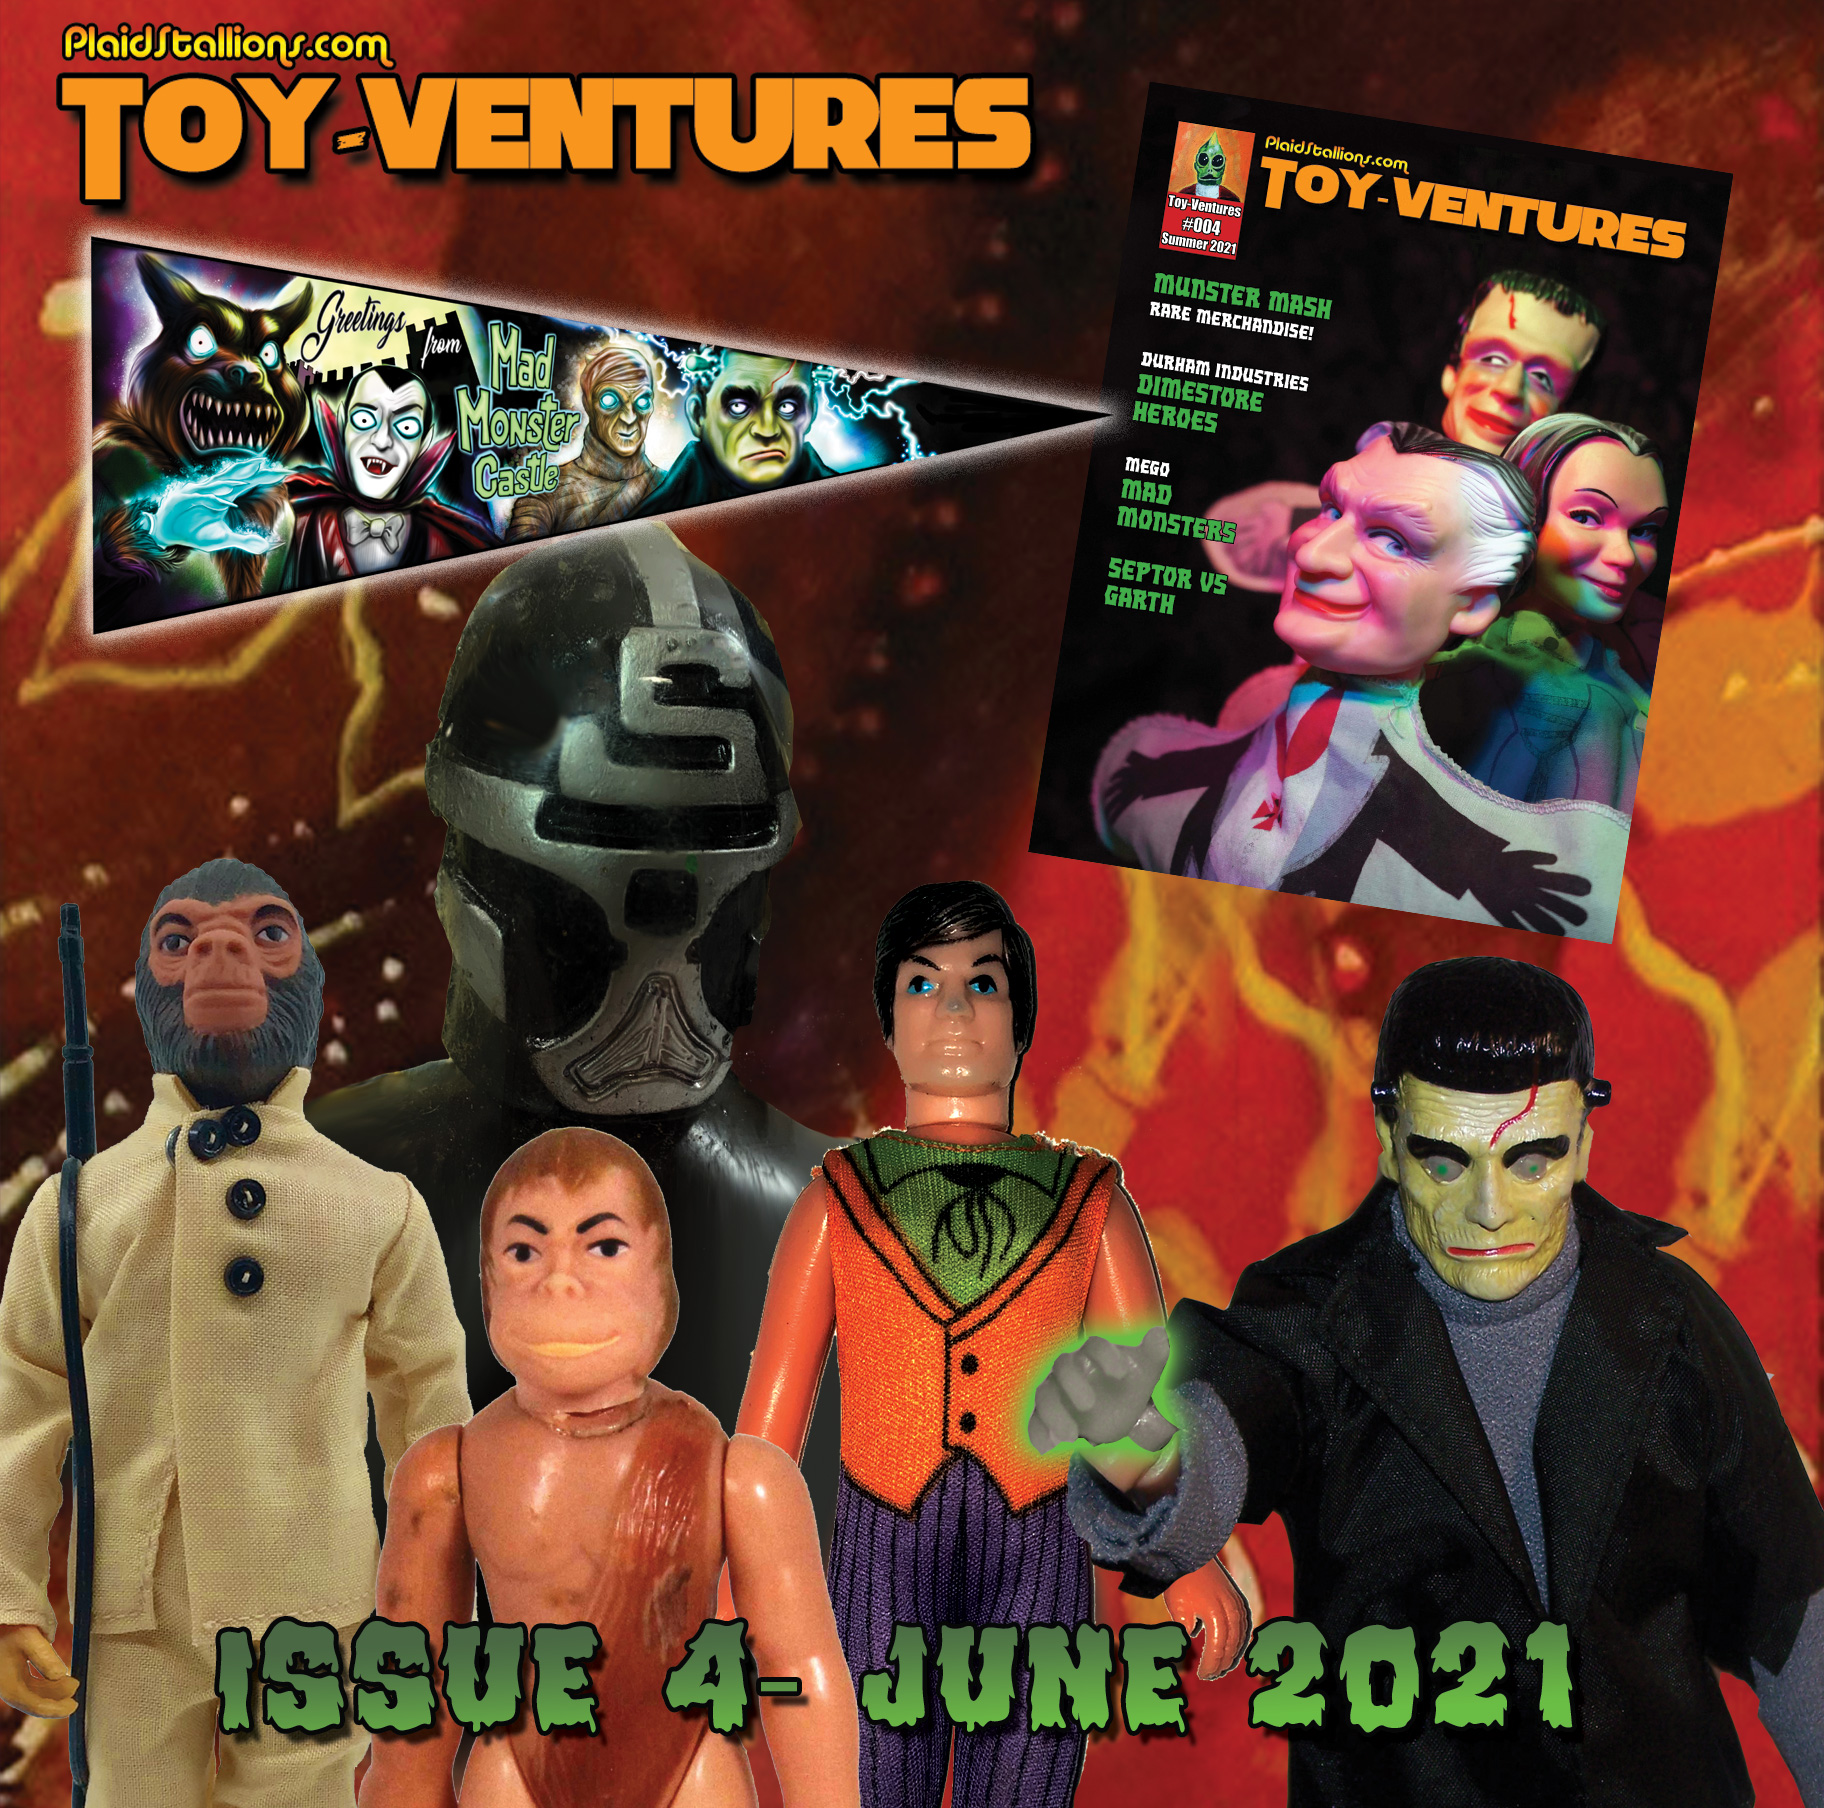 <a href="http://www.megomuseum.com/odeon/store/products/">Issue 4 of Toy-Ventures magazine is now shipping, get it while it's hot!</a> <a href="https://plaidstallions.com/reboot/wp-content/uploads/2021/05/june4.jpg"><img class="alignnone wp-image-16900 " src="https://plaidstallions.com/reboot/wp-content/uploads/2021/05/june4.jpg" alt="" width="664" height="658" /></a> <strong>FACEBOOK GROUPS FROM PLAIDSTALLIONS</strong> <a href="https://www.facebook.com/groups/podstallions"><img class="alignnone size-medium wp-image-16274" src="https://plaidstallions.com/reboot/wp-content/uploads/2021/01/93378148_10221648468230849_1206498730543415296_o-300x169.jpg" alt="" width="300" height="169" /></a> <a href="https://www.facebook.com/groups/podstallions">Pod Stallions is one of the most fun groups on Facebook.</a> <a href="https://www.facebook.com/groups/Megoknockoff"><img class="alignnone size-medium wp-image-16275" src="https://plaidstallions.com/reboot/wp-content/uploads/2021/01/136455200_10224030090249911_6860183014607719115_o-300x162.jpg" alt="" width="300" height="162" /></a> <strong><a href="https://www.facebook.com/groups/Megoknockoff">Mego Knock Off Headquarters</a>- The leading group discussing 70s dimestore goodness, we talk vintage toys, not others!</strong> <a href="https://plaidstallions.com/reboot/plaidstallions-action-figure-galleries-mego-knock-offs/">Visit the PlaidStallions Action Figure Archive, we catalog unique toylines from the 70s &amp; 80s including rare Japanese toys and knock-offs, updates done daily.</a><a href="https://plaidstallions.com/reboot/plaidstallions-action-figure-galleries/"><img class="size-medium wp-image-16947" src="https://plaidstallions.com/reboot/wp-content/uploads/2021/05/Action-Figure-Archive-Header-300x126.jpg" alt="Plaid Stallions Action Figure Archive" width="300" height="126" /></a> PlaidStallions Action Figure Archive&nbsp; &nbsp;